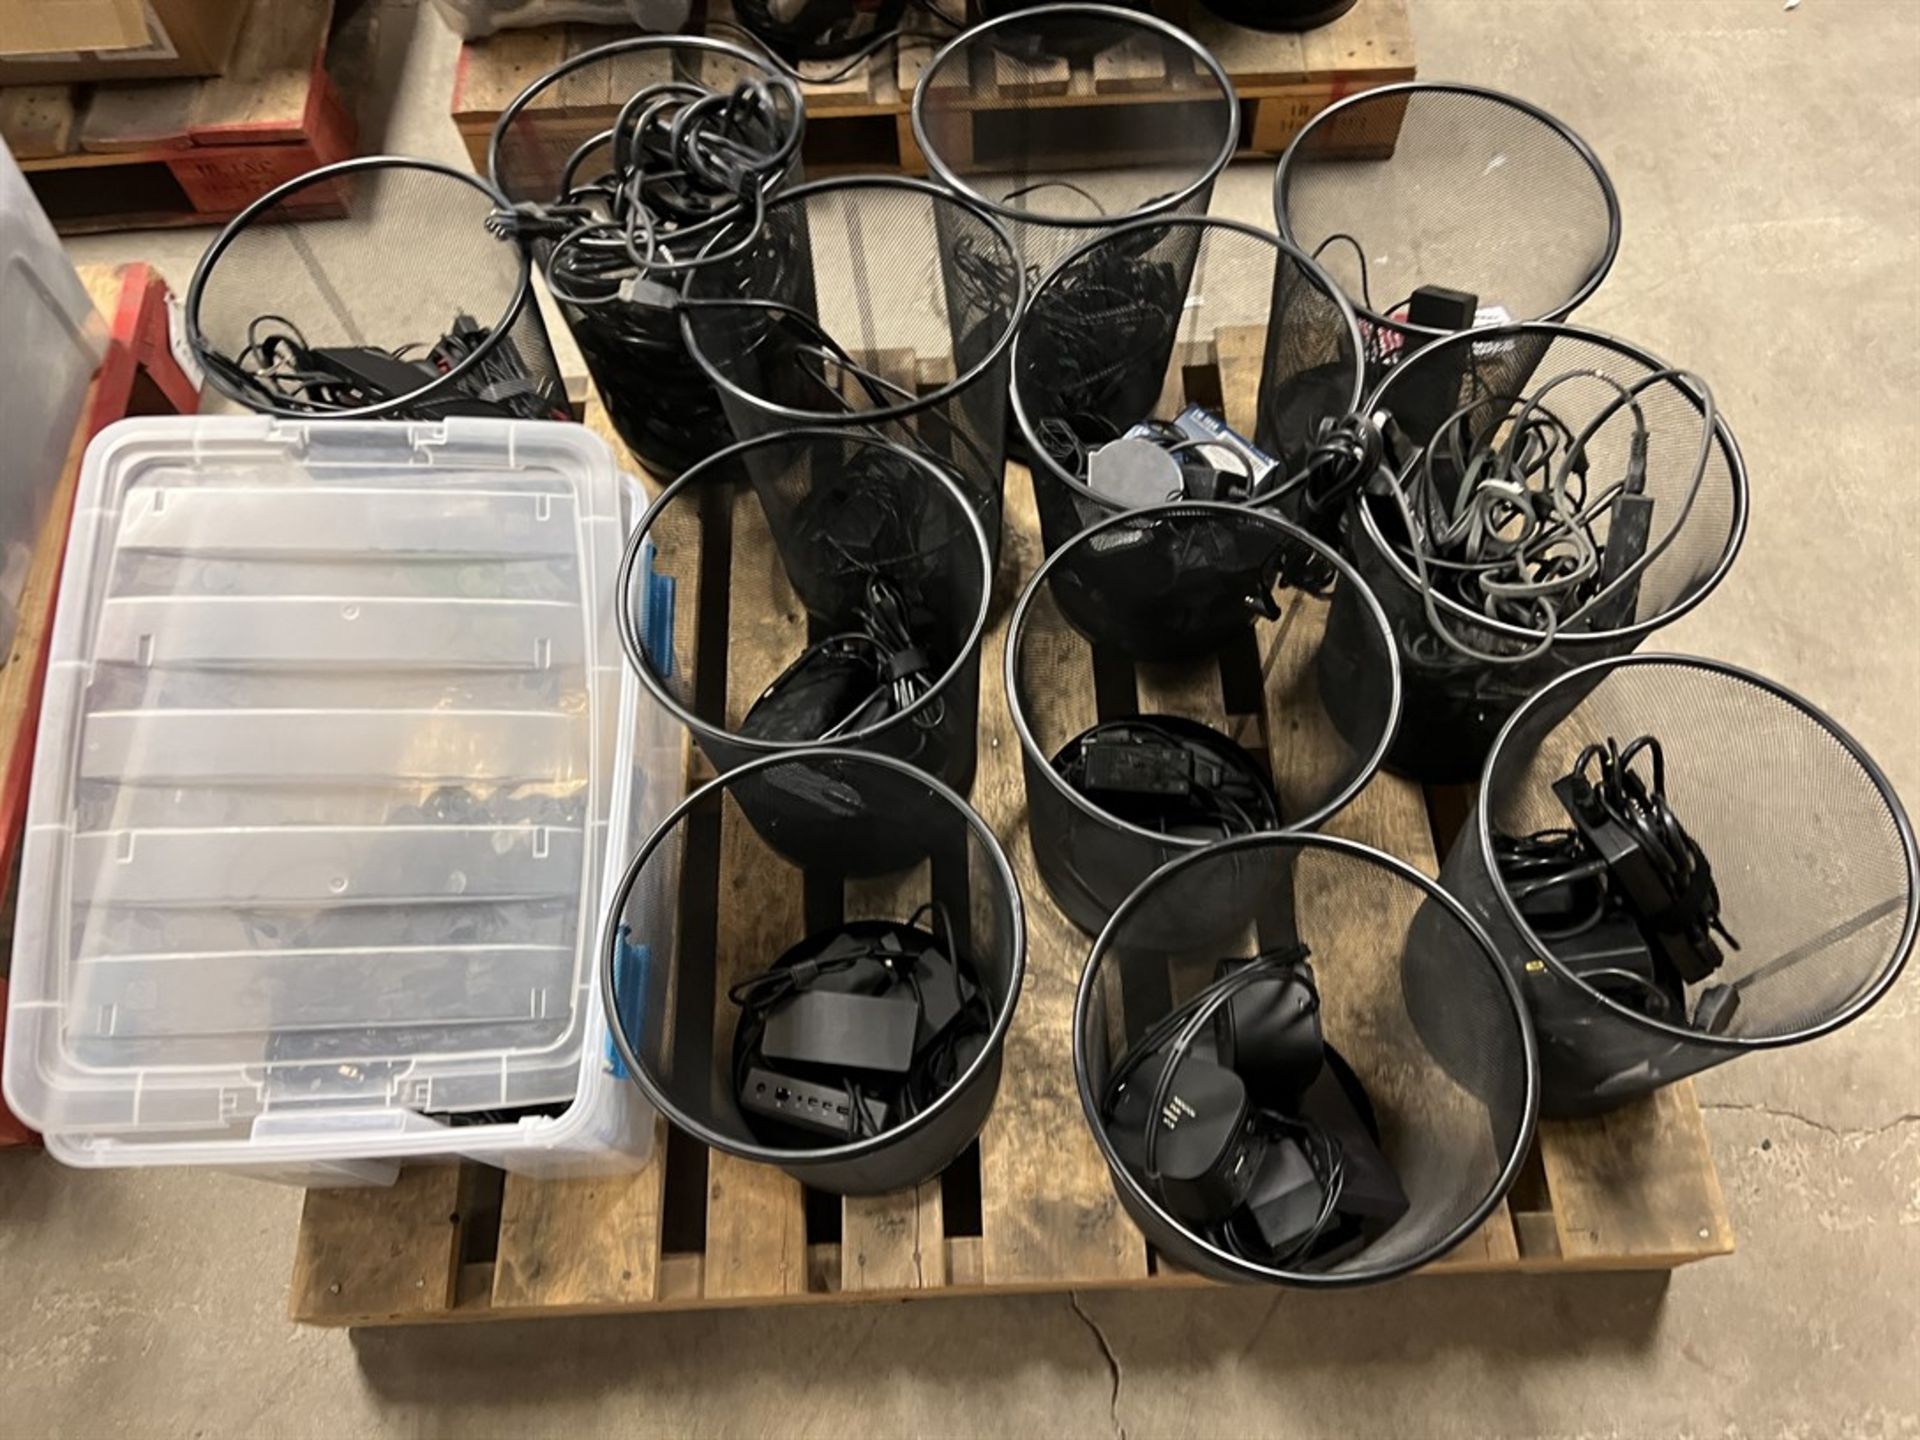 Lot of Assorted Laptop and Monitor Power Cords - Image 2 of 7